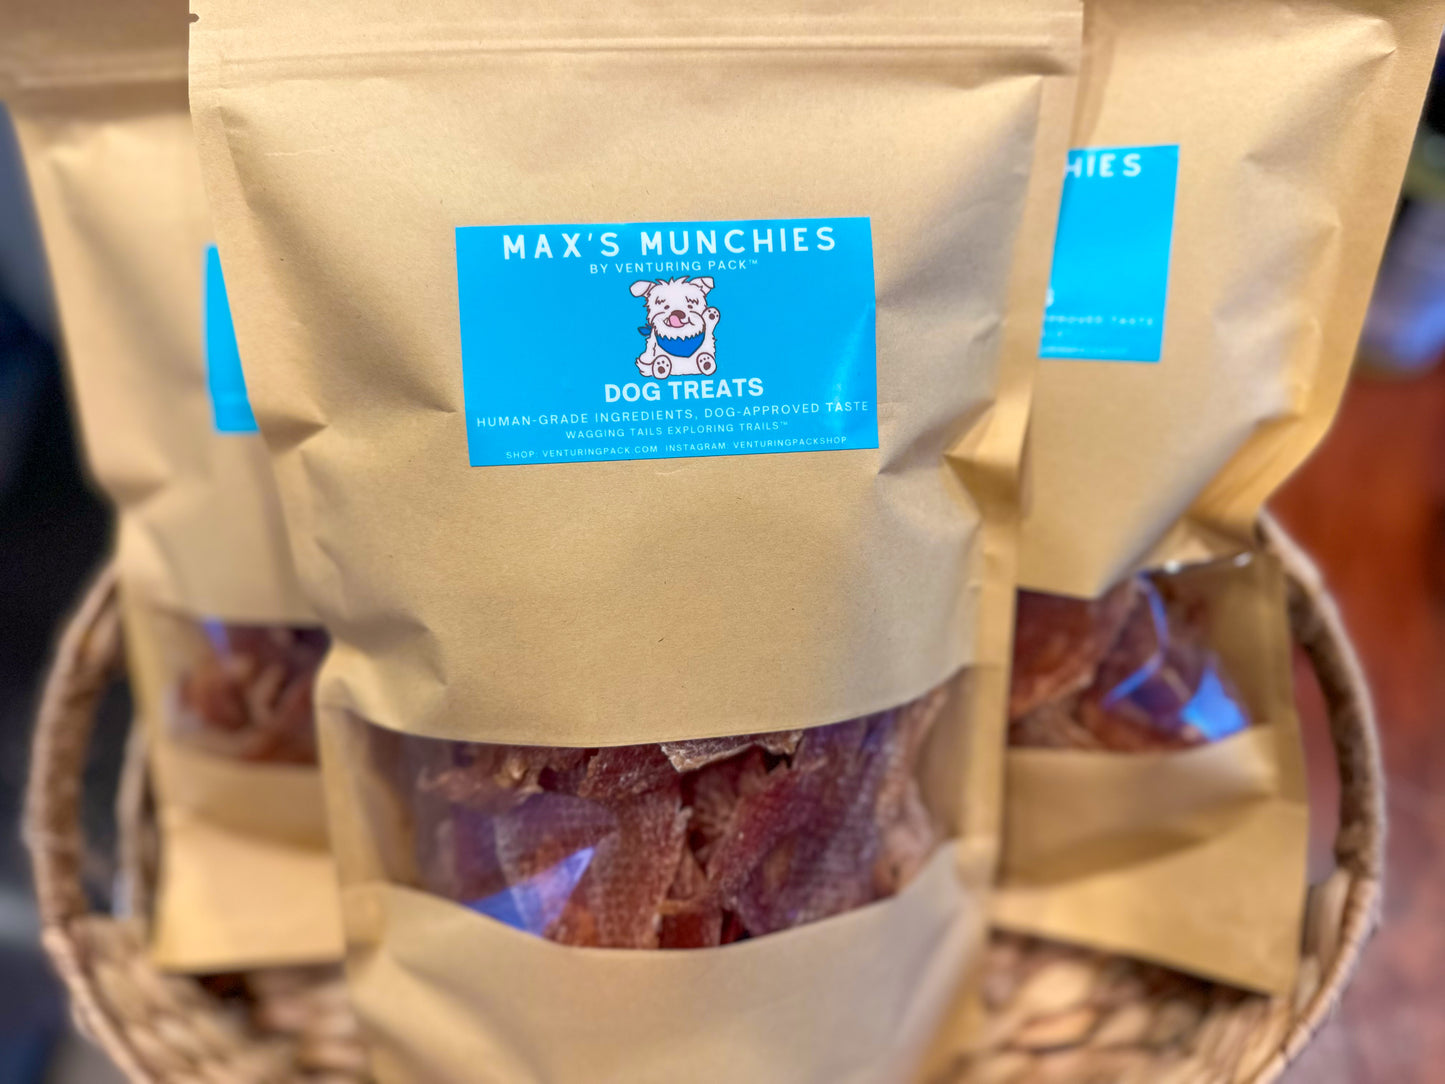 Max's Munchies: Single Ingredient, Chicken Jerky Treats (2 bags of 6 oz each)